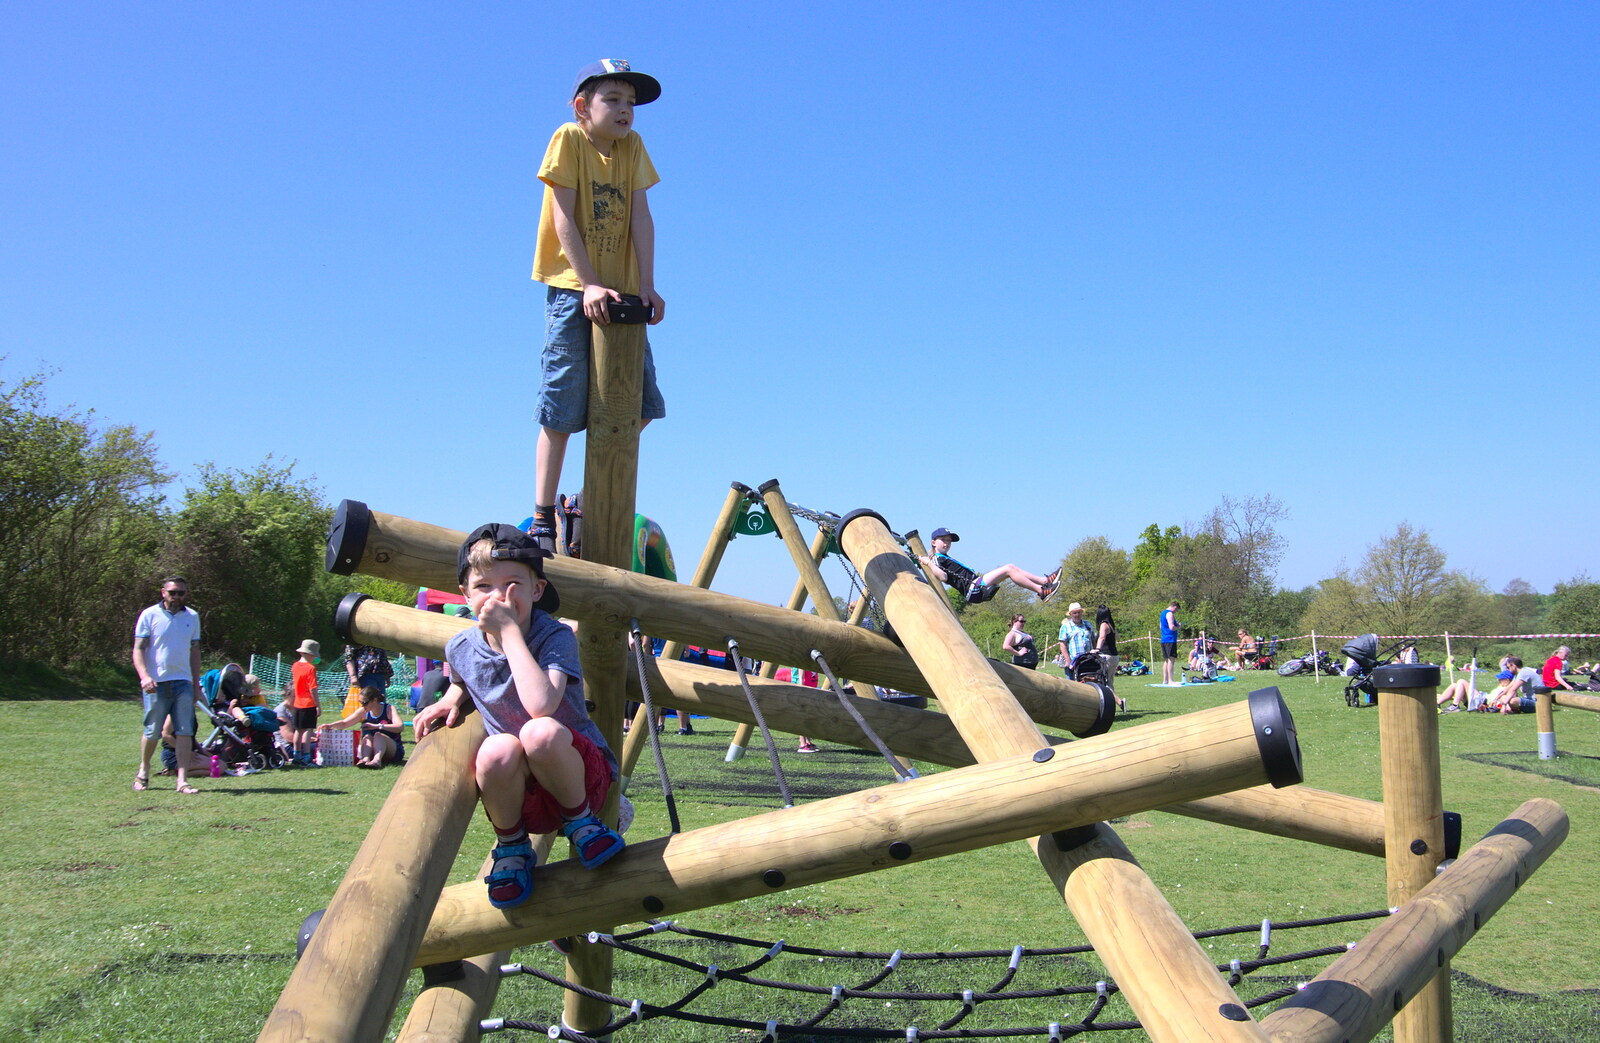 The boys are on a climbing frame from Isobel's 10km Run, Alton Water, Stutton, Suffolk - 6th May 2018